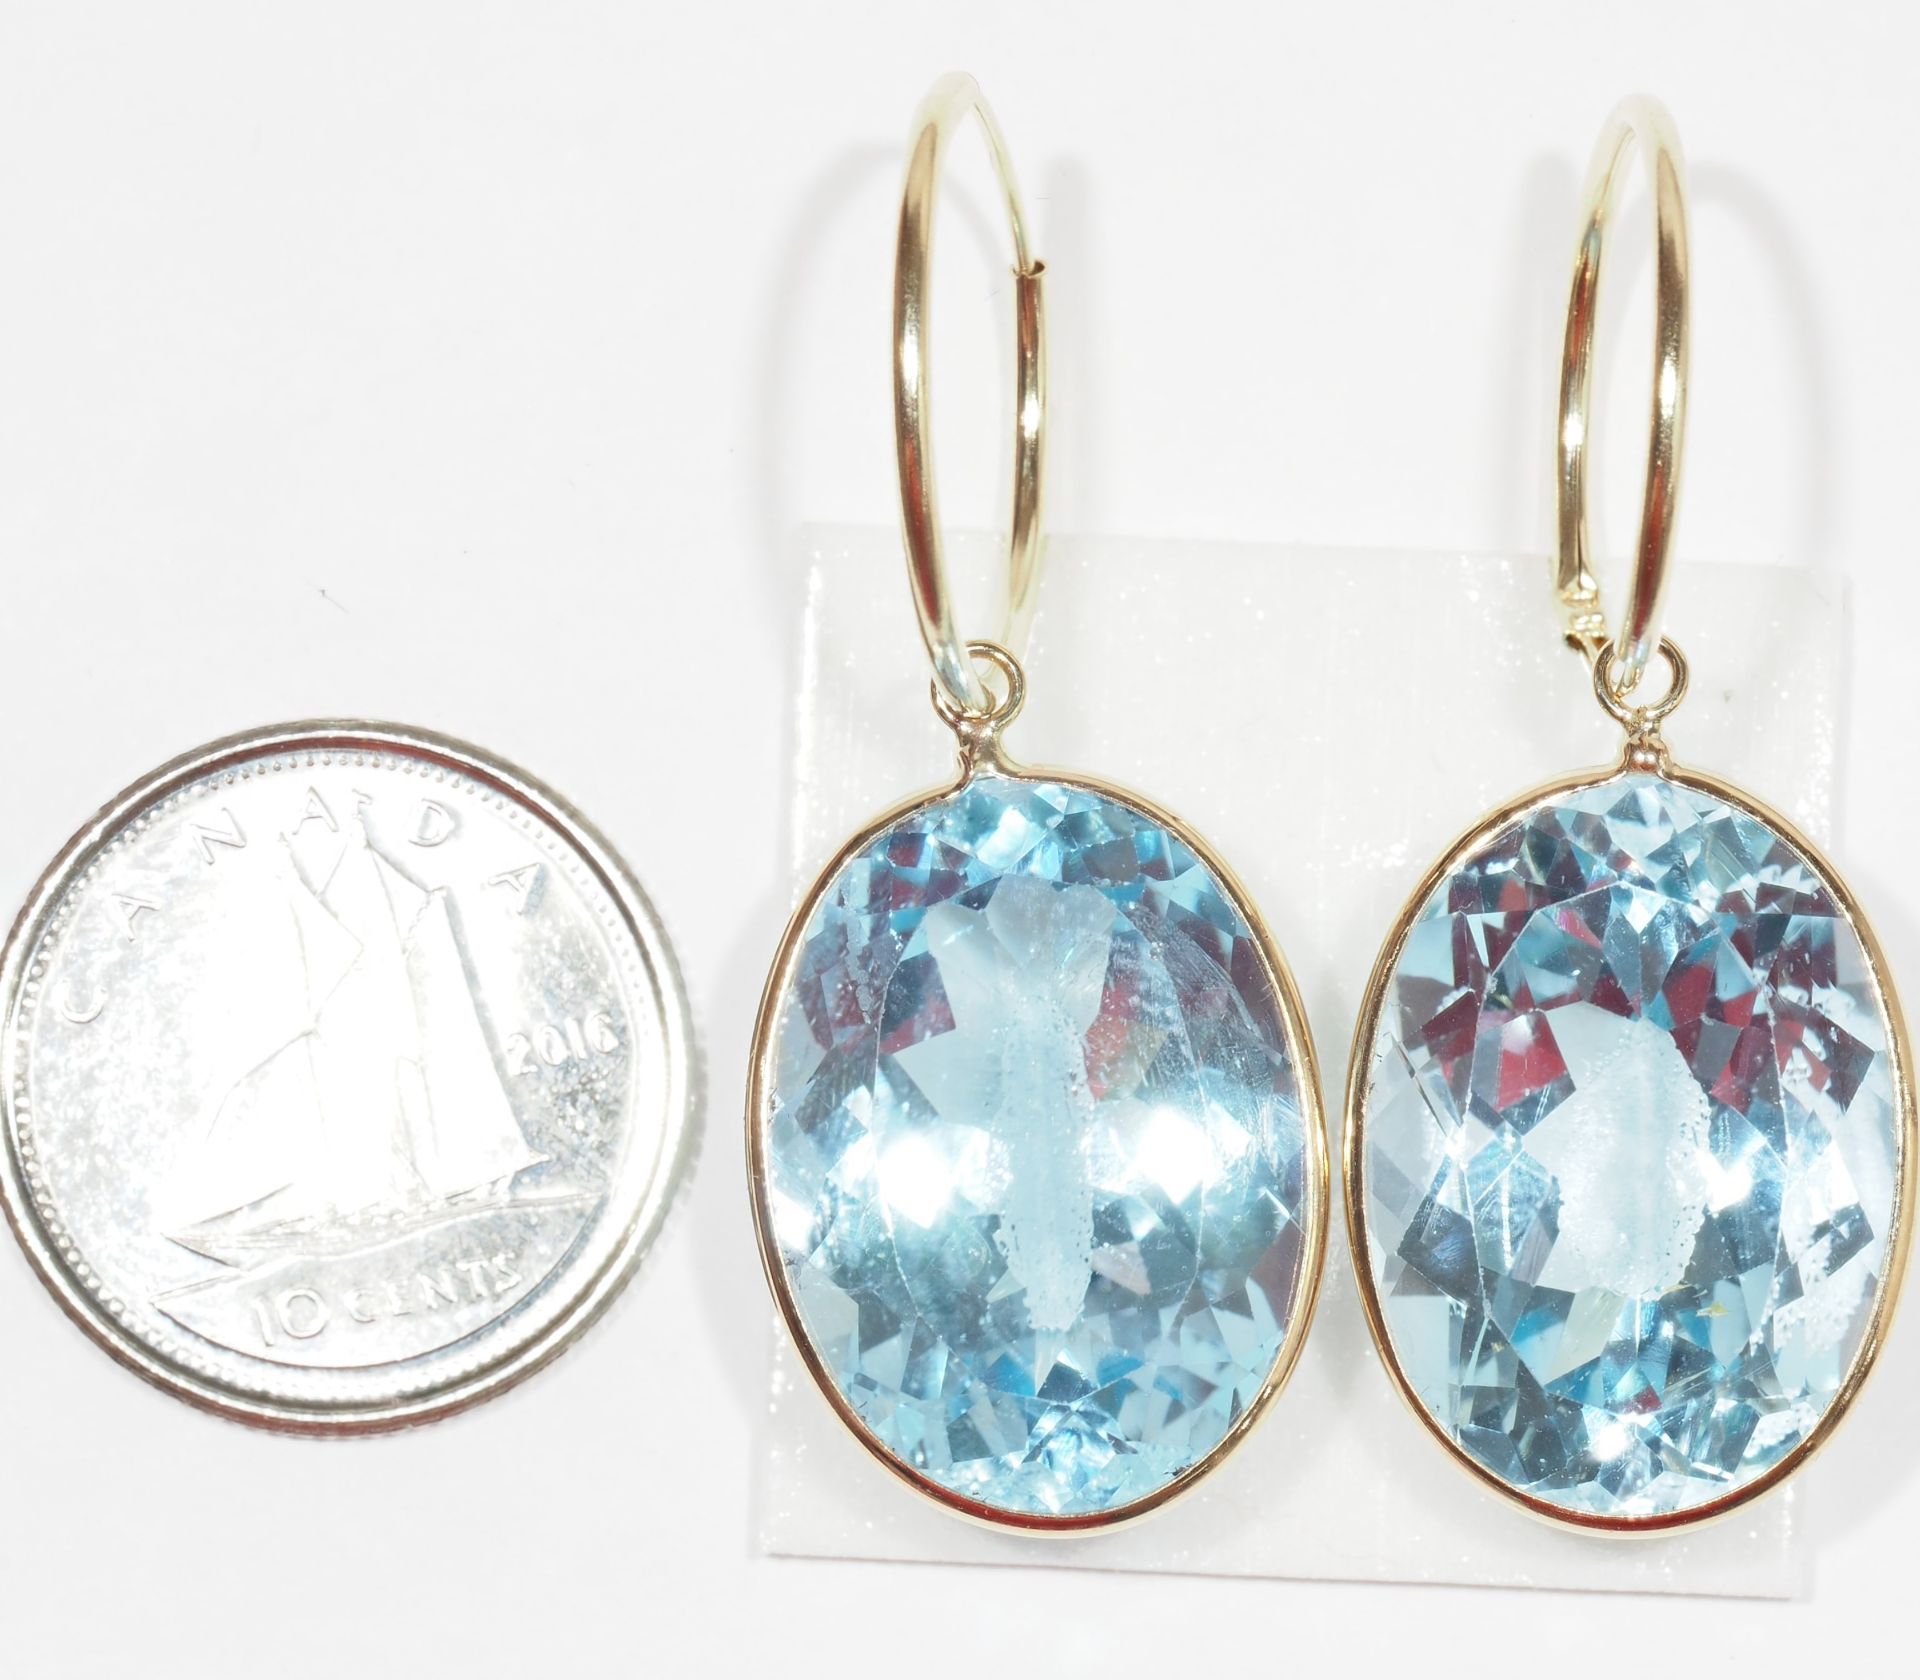 14K Yellow Gold Large Blue Topaz (31.0ct) Hoope Earrings w/ New Gift Box, Insurance Value $1600 - Image 2 of 3